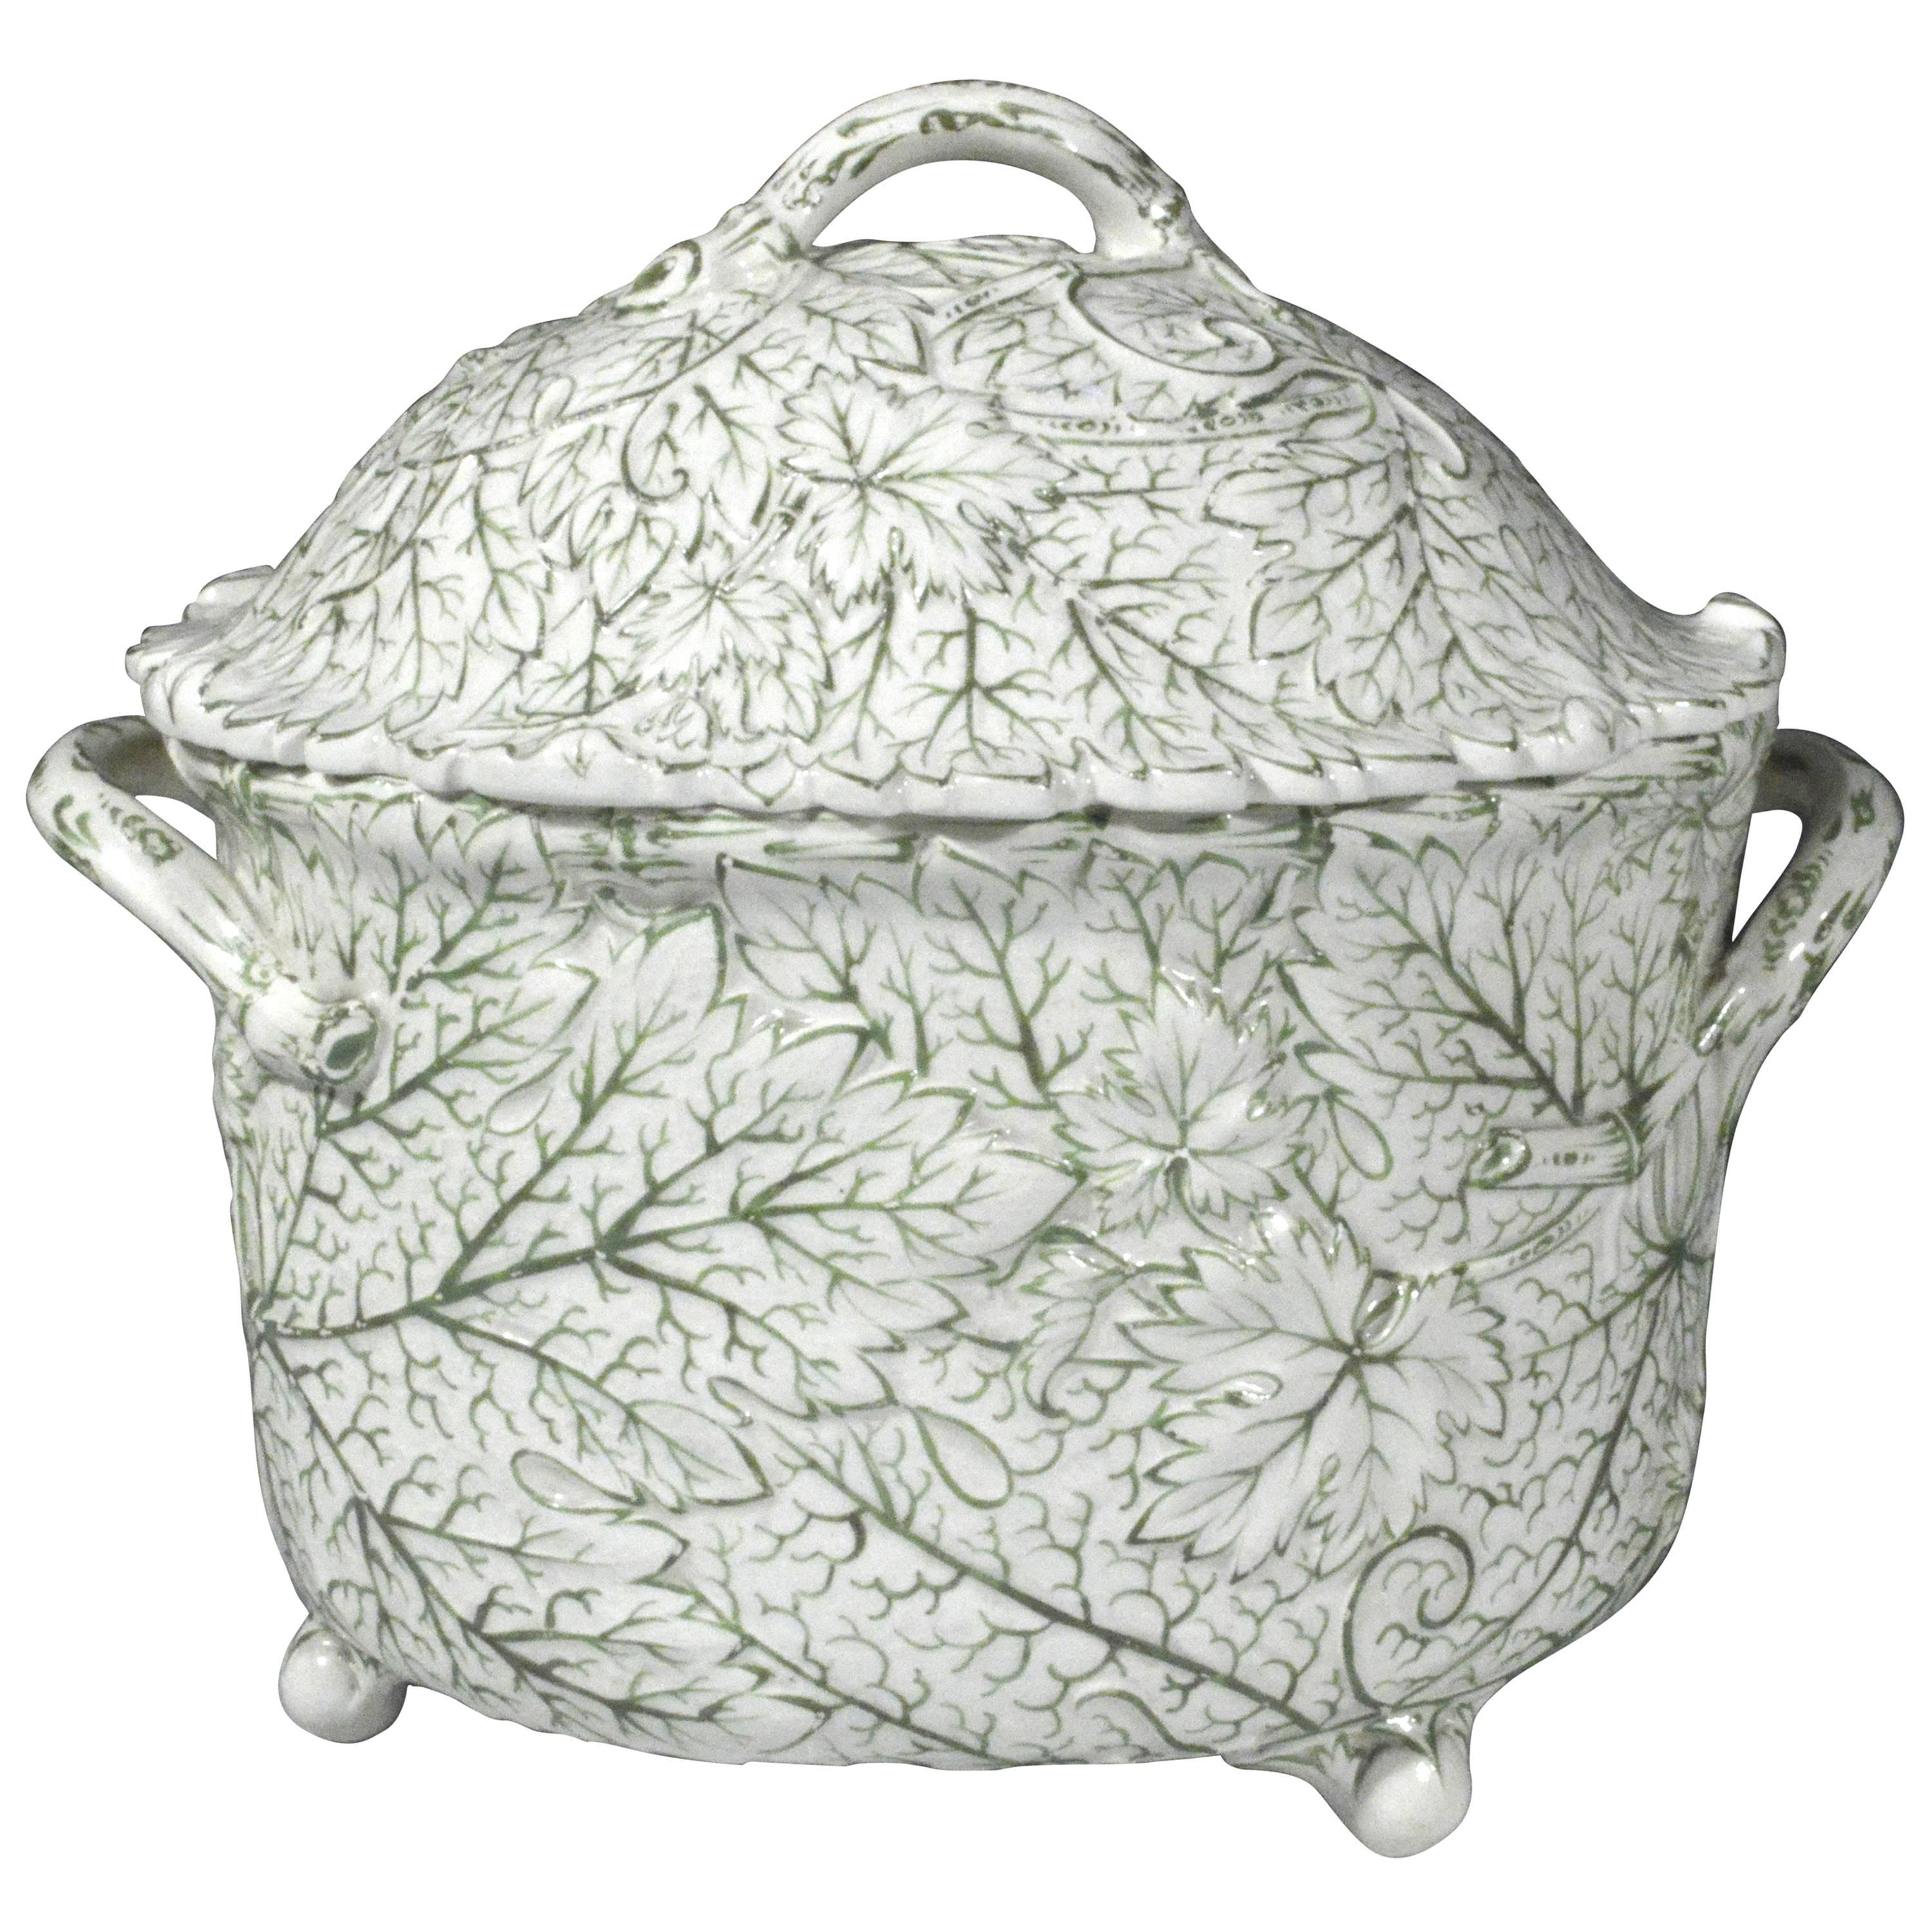 Wedgwood Pearlware Moulded Leaf Tureen and Cover